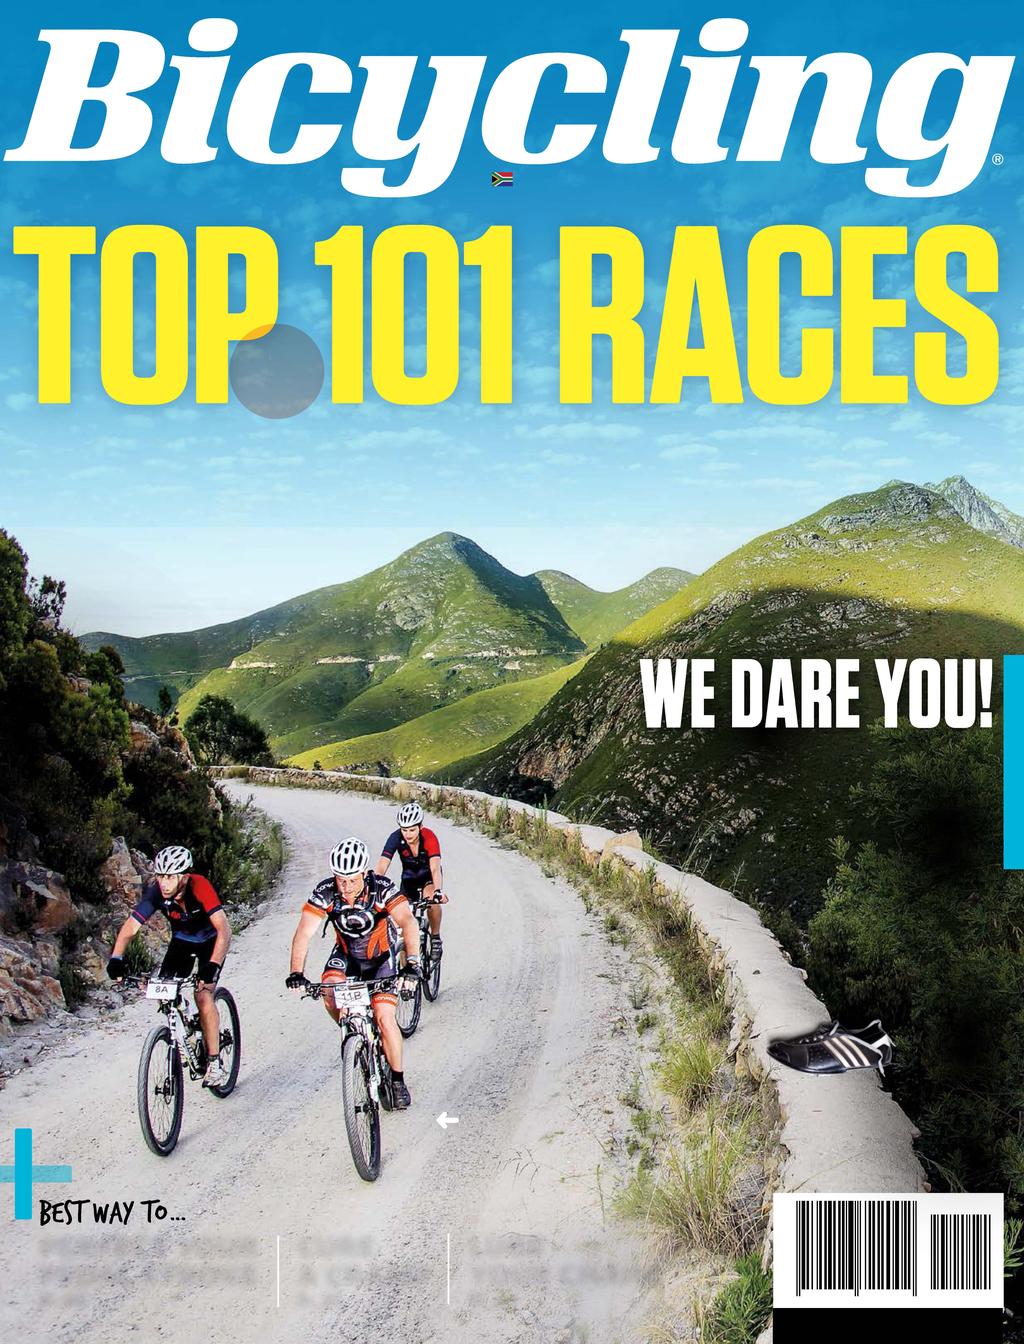 FEBRUARY 2016 SA S BEST-SELLING CYCLING MAGAZINE B U M PAEGRE 2 0 - PC I A L SPE OUR EXPERT GUIDE TO THE BEST ROAD, MTB AND STAGE EVENTS IN SA (START PLANNING NOW!